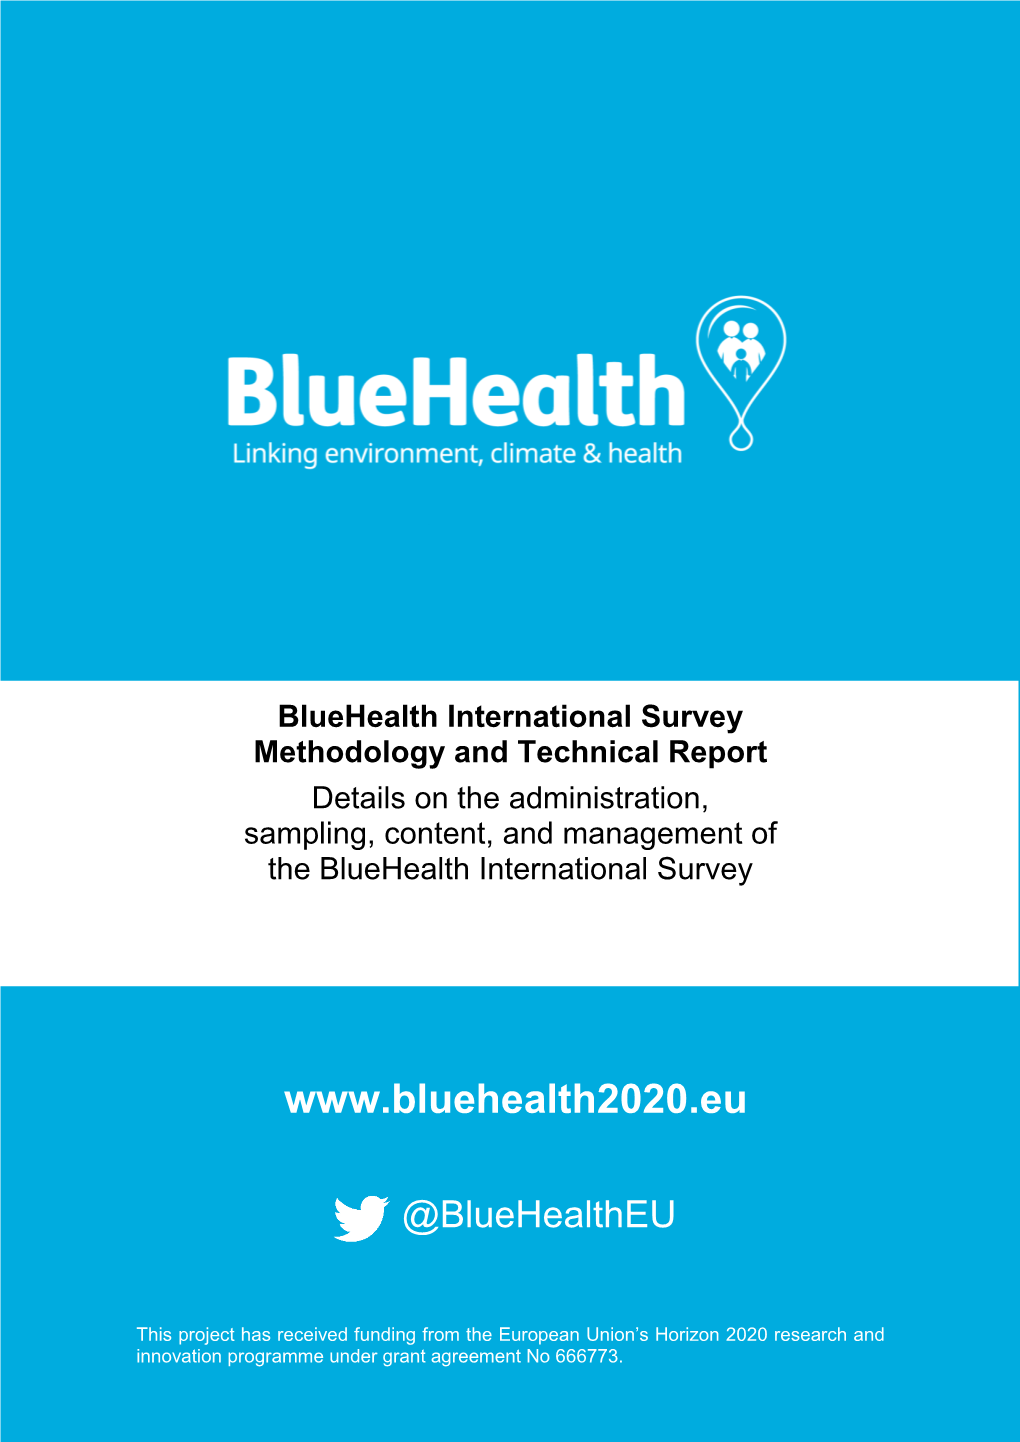 Bluehealth International Survey Methodology and Technical Report